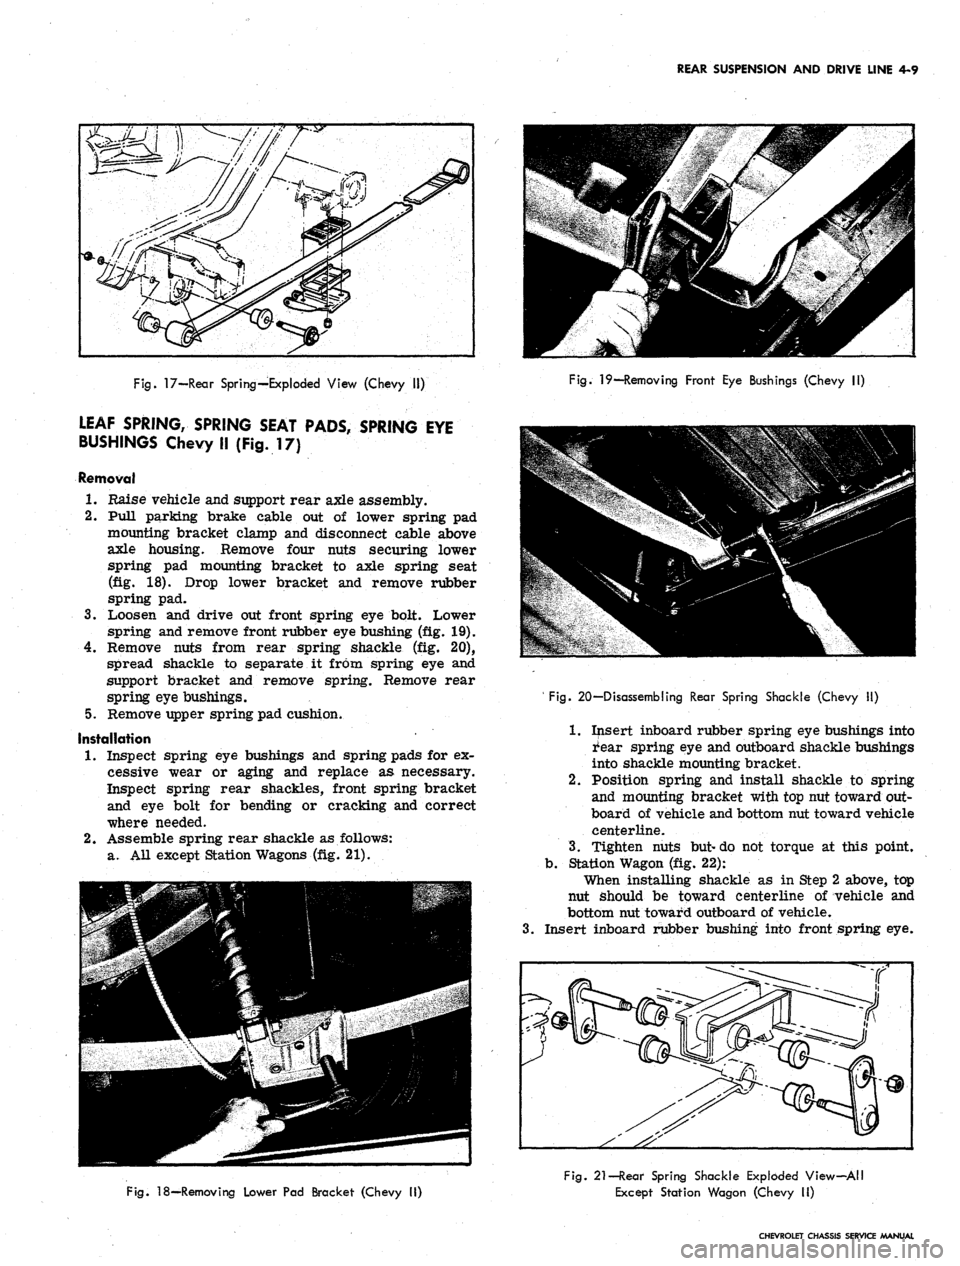 CHEVROLET CAMARO 1967 1.G Chassis Service Manual 
REAR SUSPENSION AND DRIVE LINE 4-9

Fig.
 17—Rear Spring—Exploded View (Chevy II)

LEAF SPRING, SPRING SEAT PADS, SPRING EYE

BUSHINGS Chevy II (Fig. 17)

Removal

1.
 Raise vehicle and support r